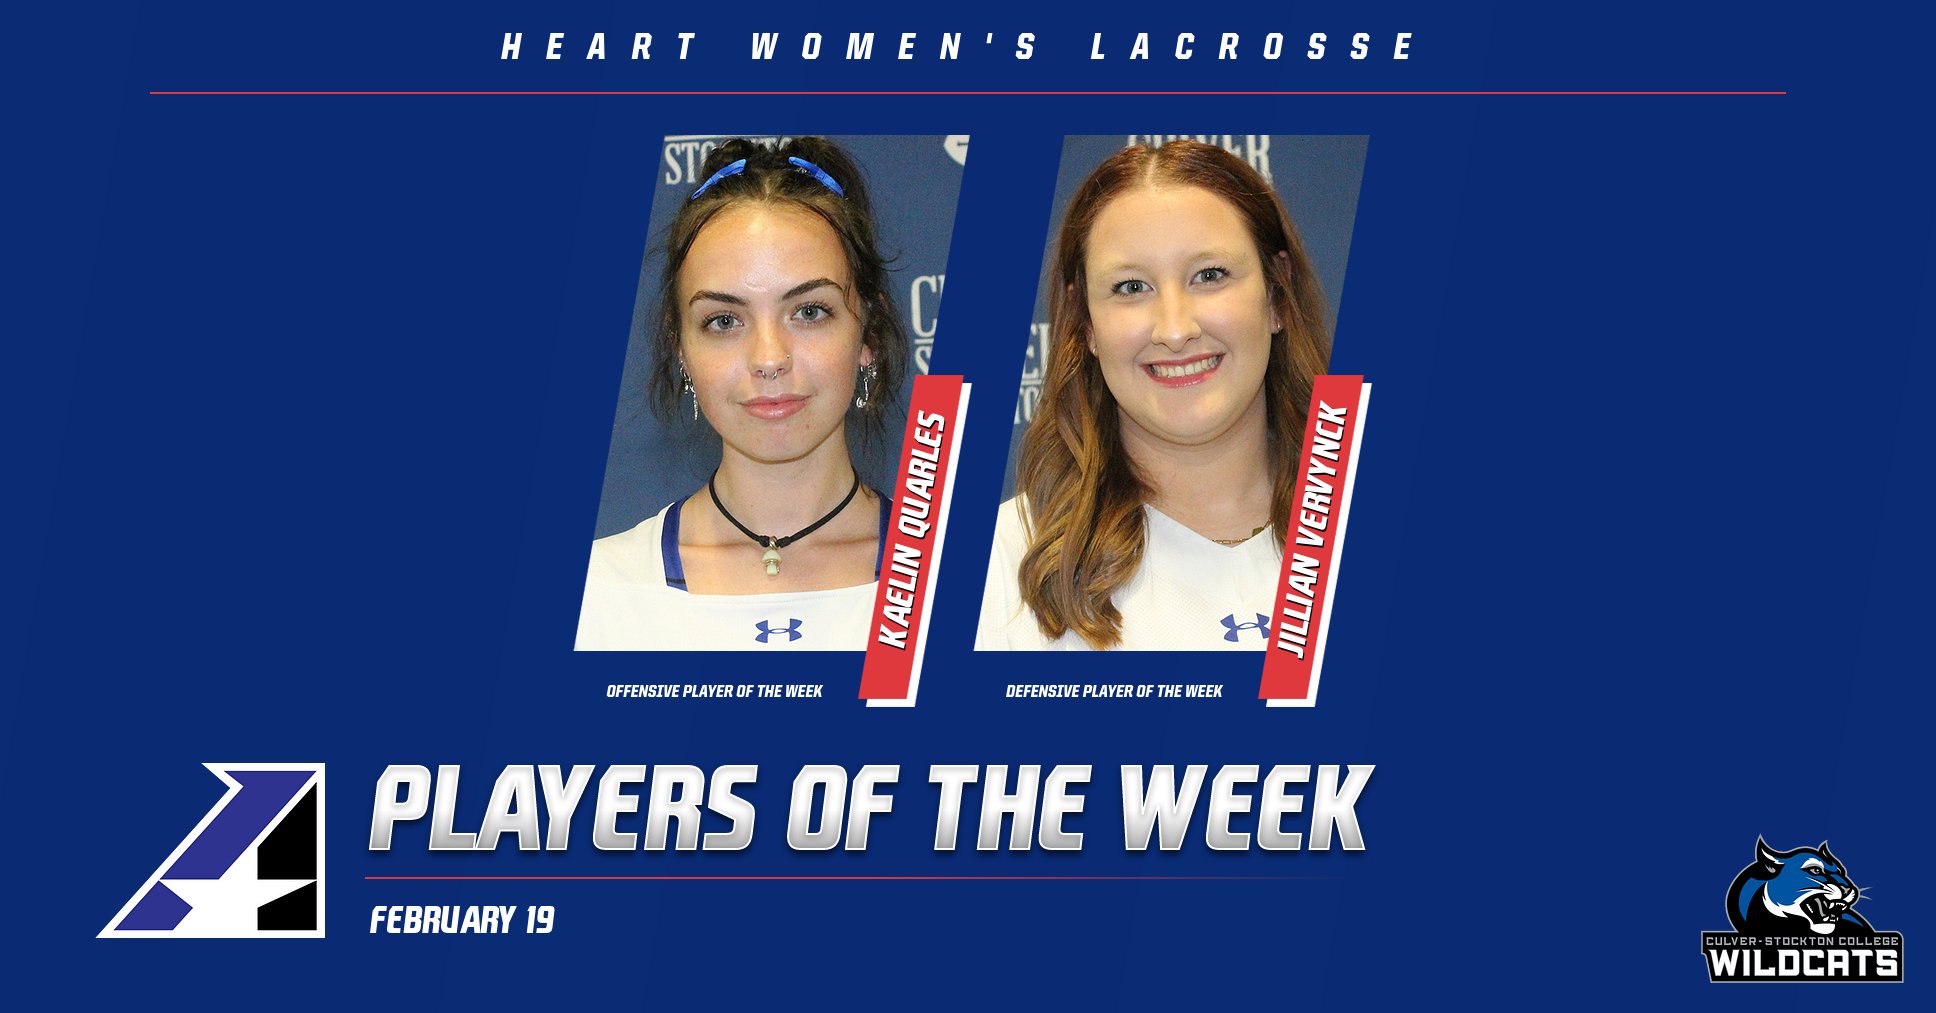 Culver-Stockton College Sweeps Heart Women’s Lacrosse Player of the Week Awards